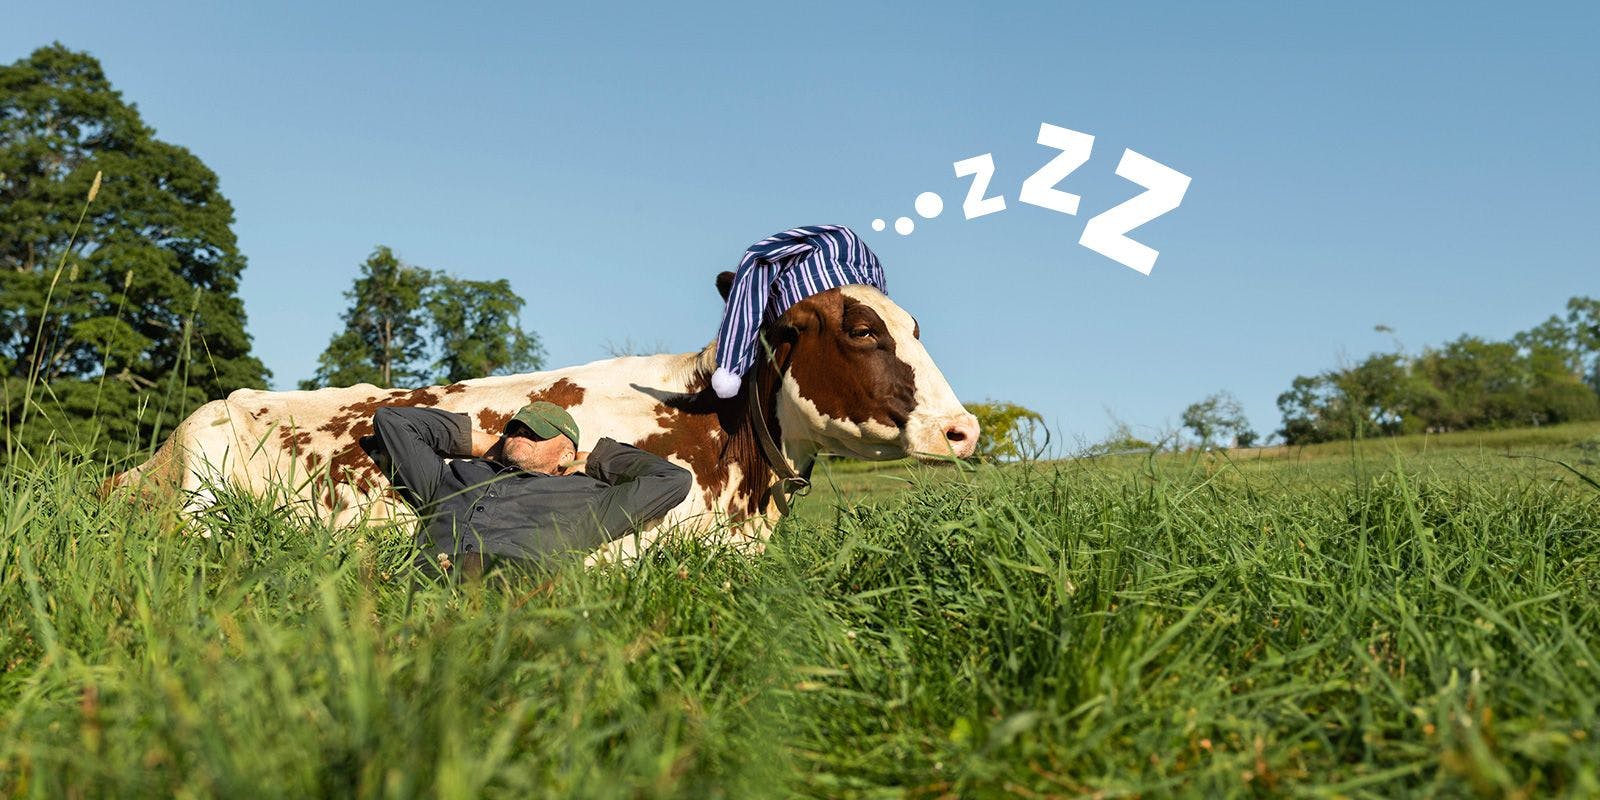 A farmer rests on a lying cow, which is wearing a nightcap that was digitally inserted into the photo.